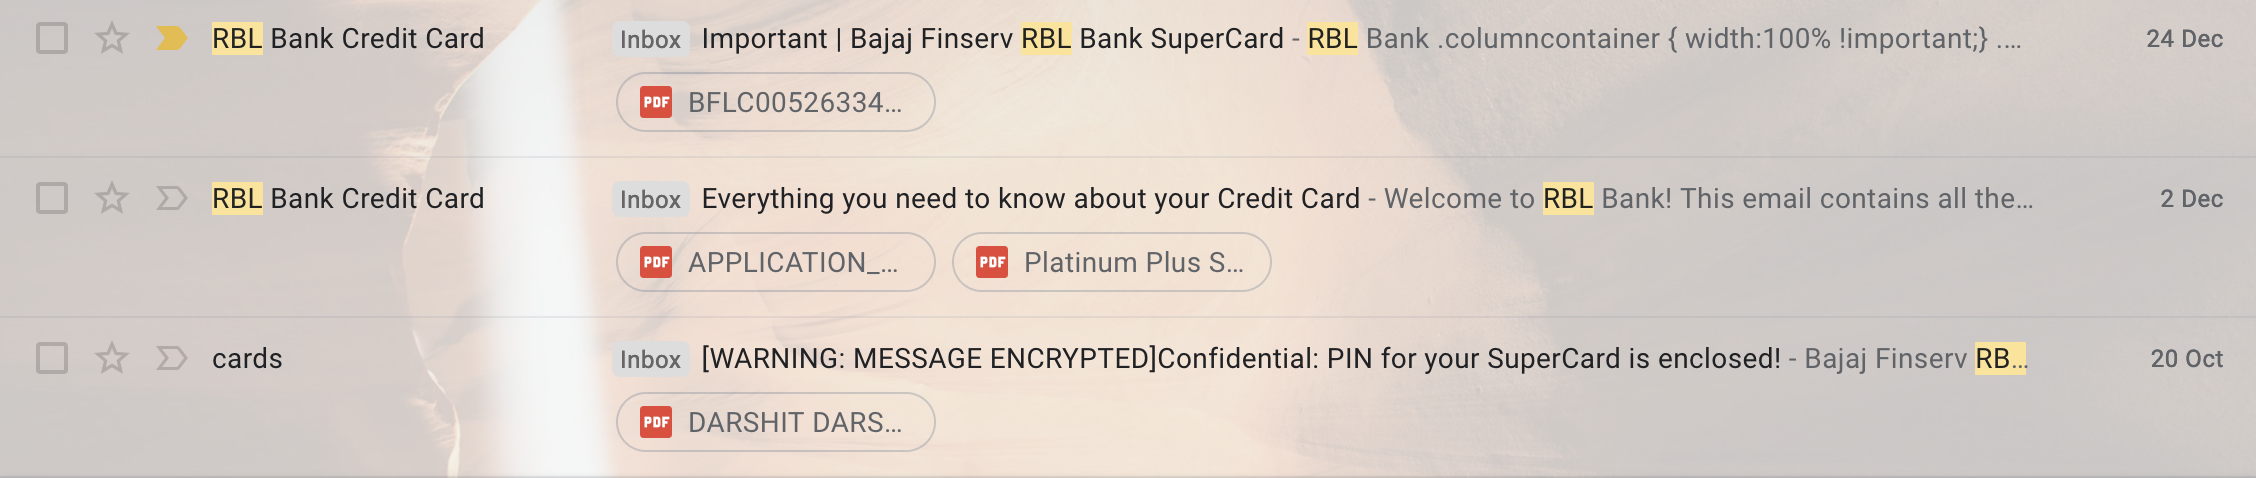 RBL Bank being large hearted and sharing Credit Card PINs